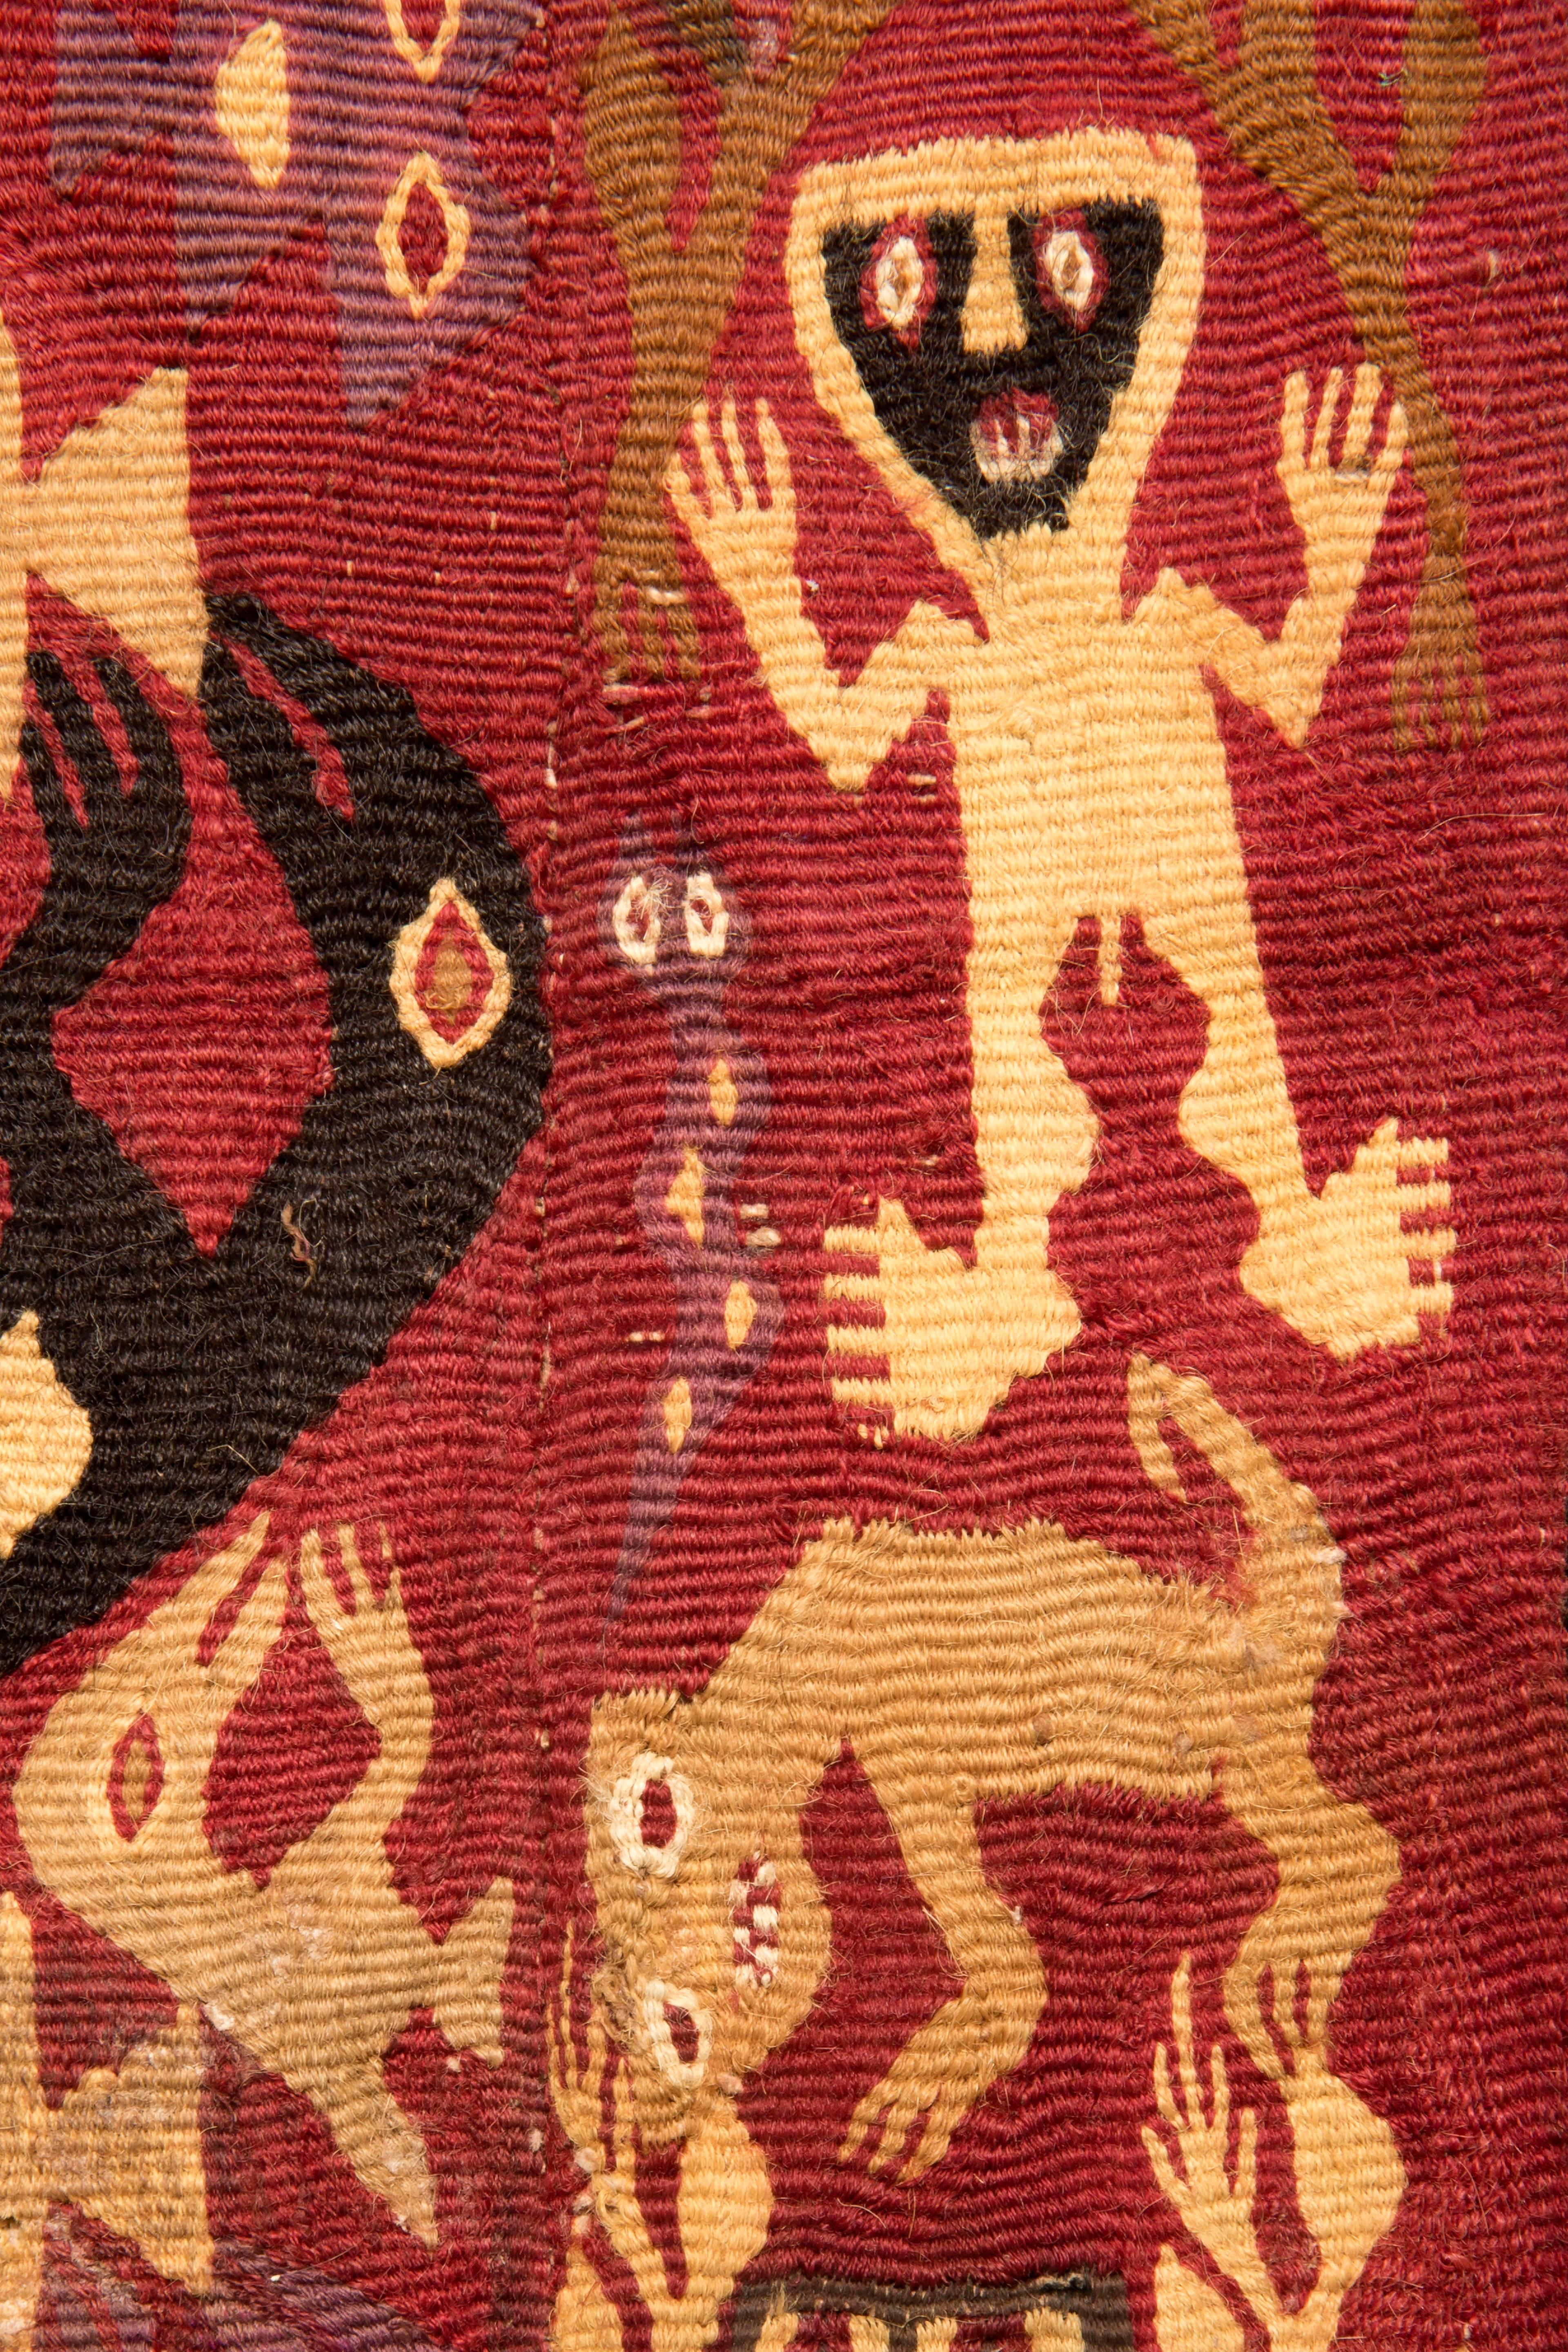 Brown Chancay coca bag with shamans and zoomorphic figures depicted in the centre on a in various colors on a red background.

This piece is accompanied by an EU cultural goods certificate.